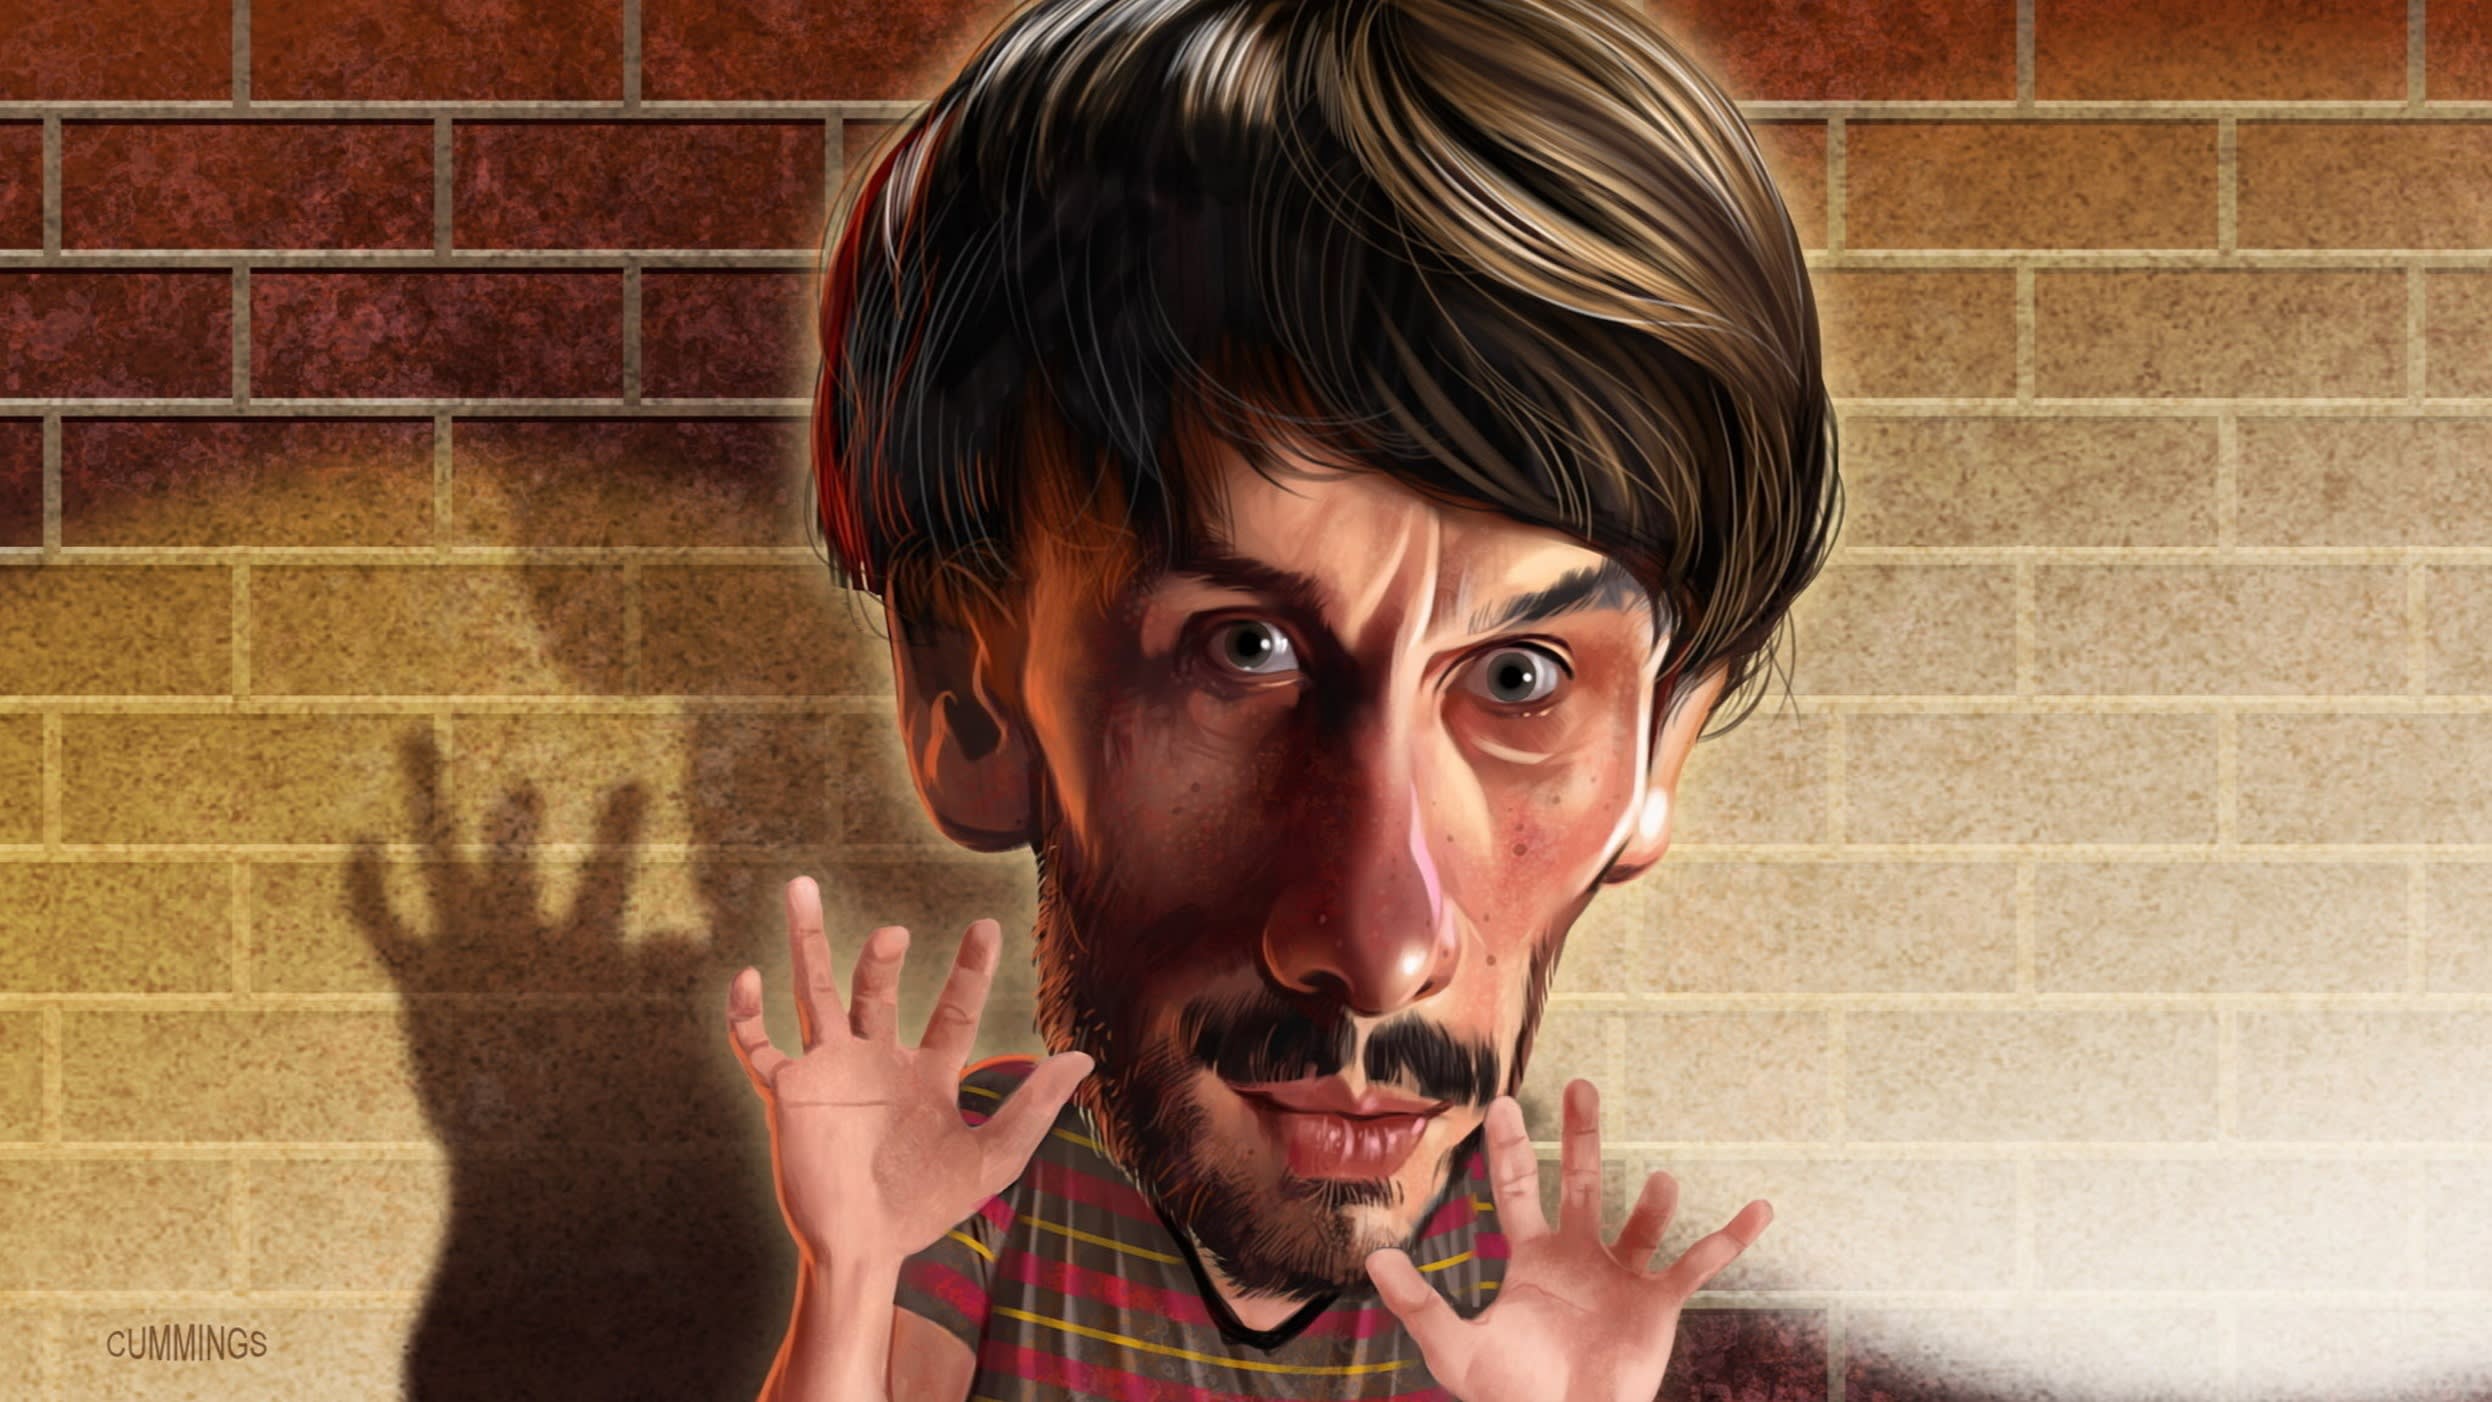 Illustration of Richard Gadd holding his hands up defensively against a background of a brick wall